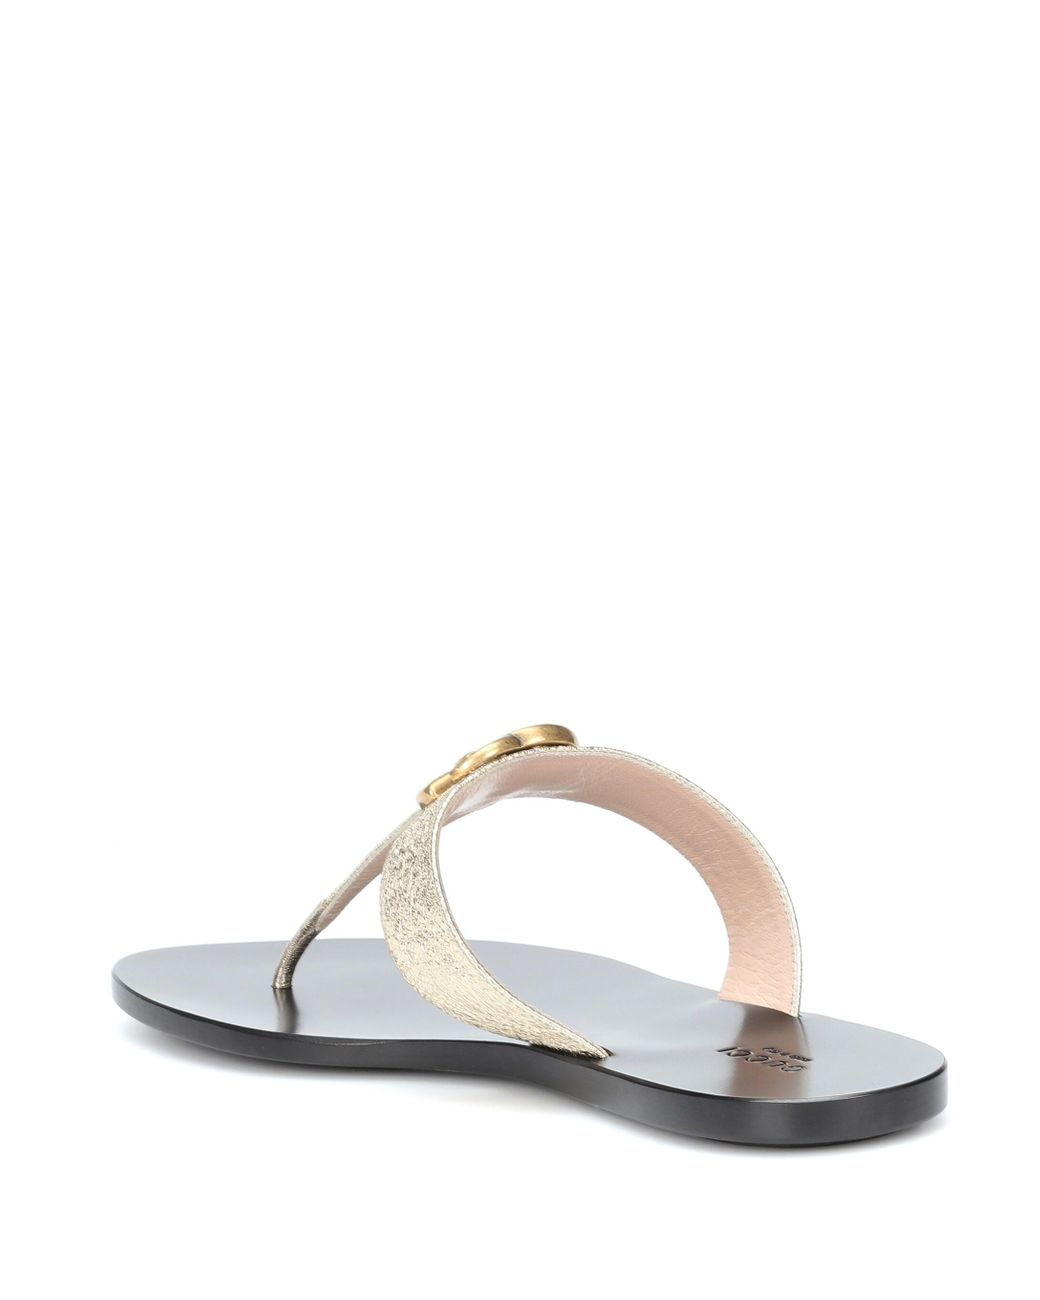 Gucci Marmont Leather Sandals in Gold (Metallic) - Save 35% | Lyst